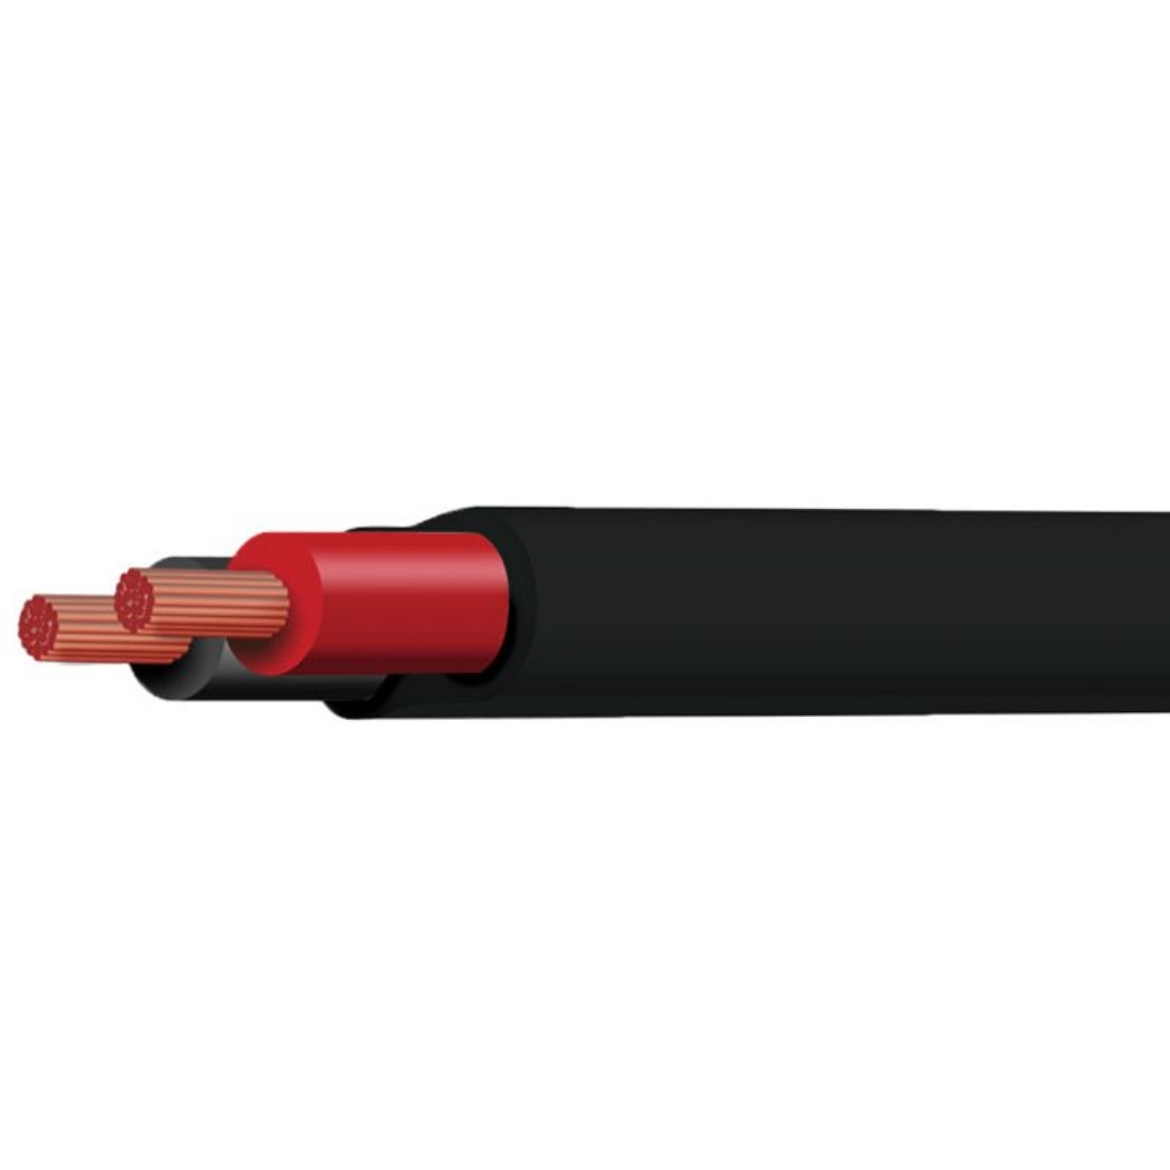 Picture of TYCAB 4MM TWIN CORE CABLE CUT 22A TWIN SHEATH BLACK/RED - PER METER